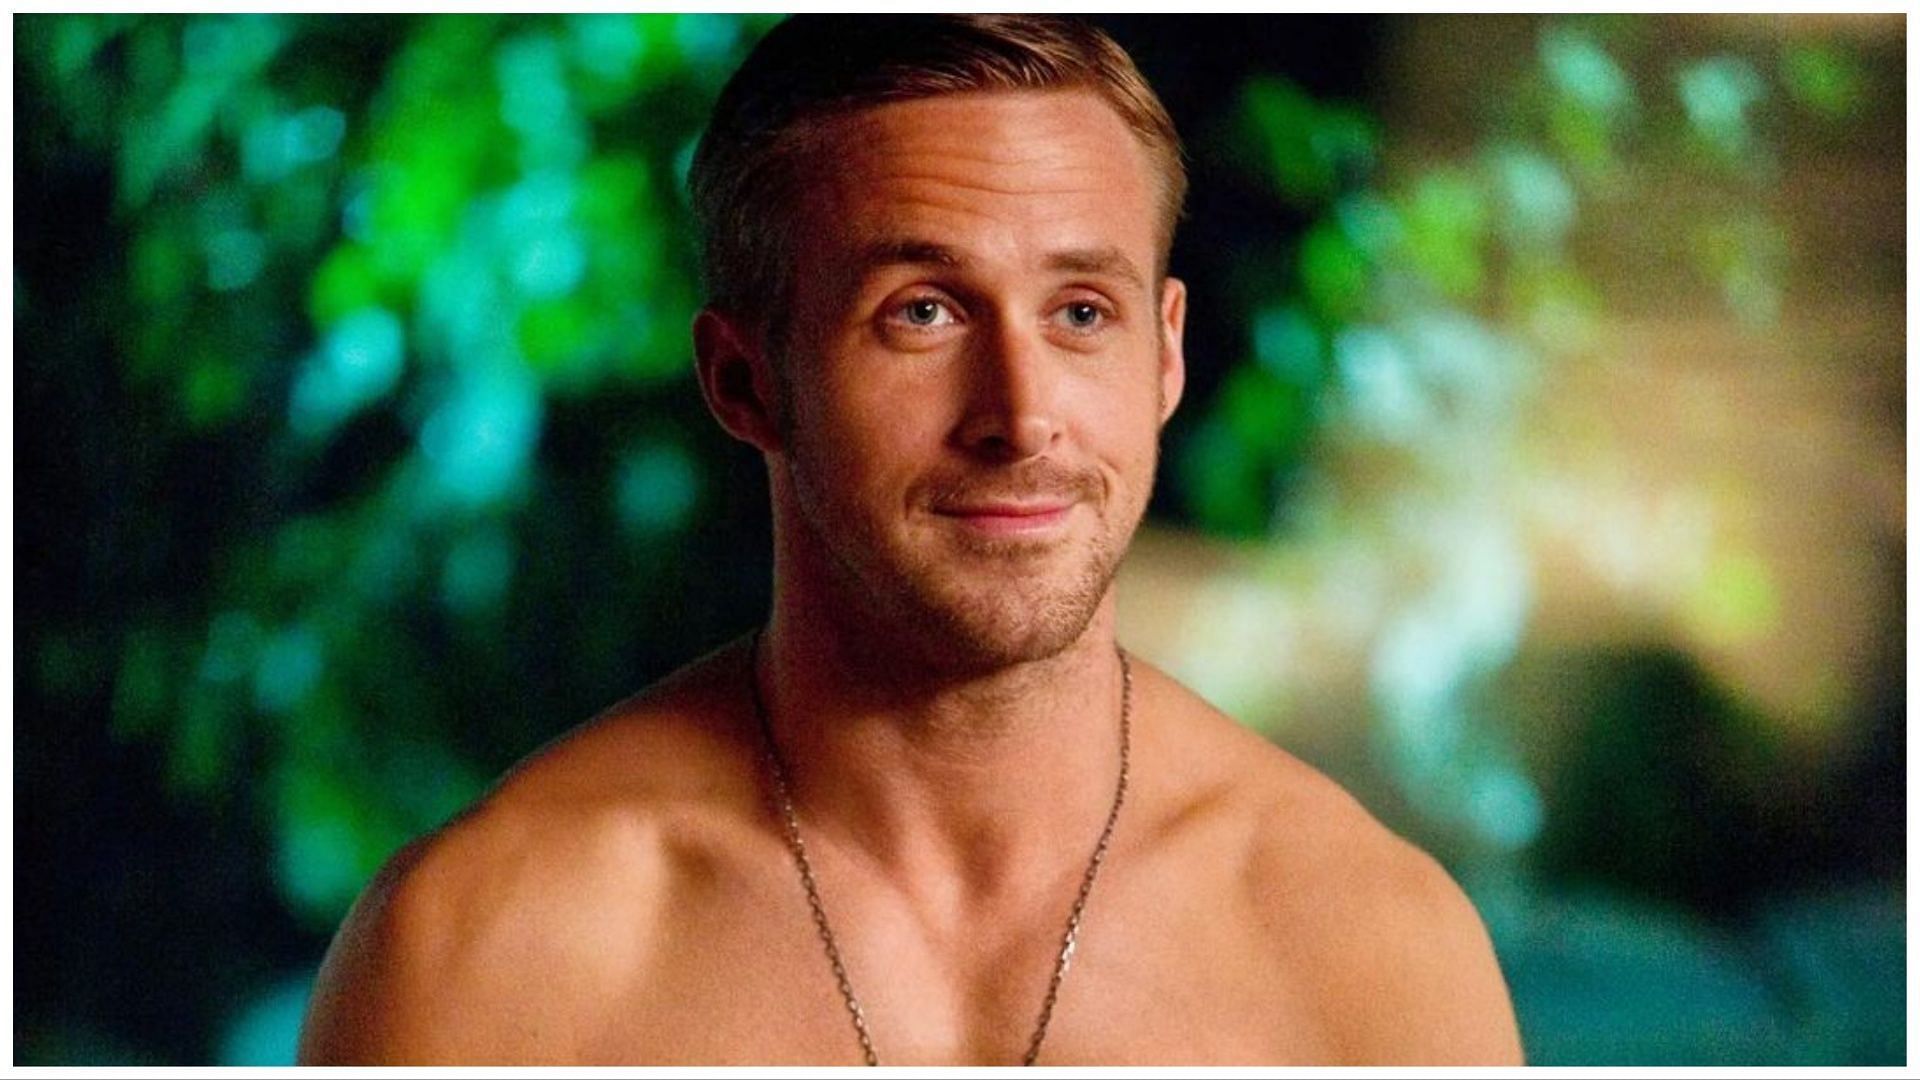 Ryan Gosling workout has been the talk of the town lately. (Image via Instagram)